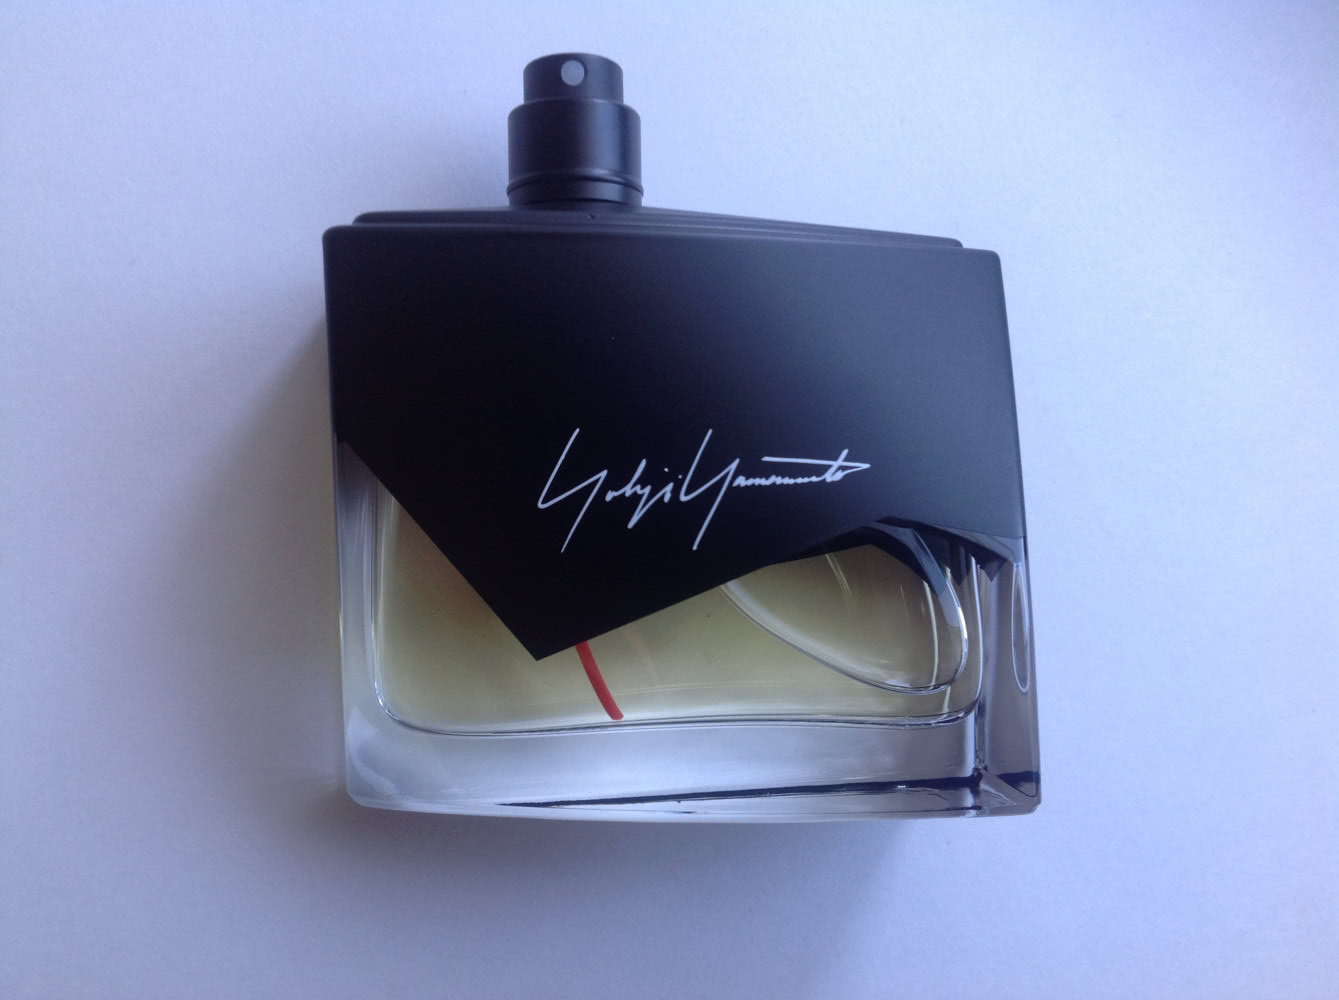 Yohji Yamamoto, I'm not going to disturb you Homme, делюсь.